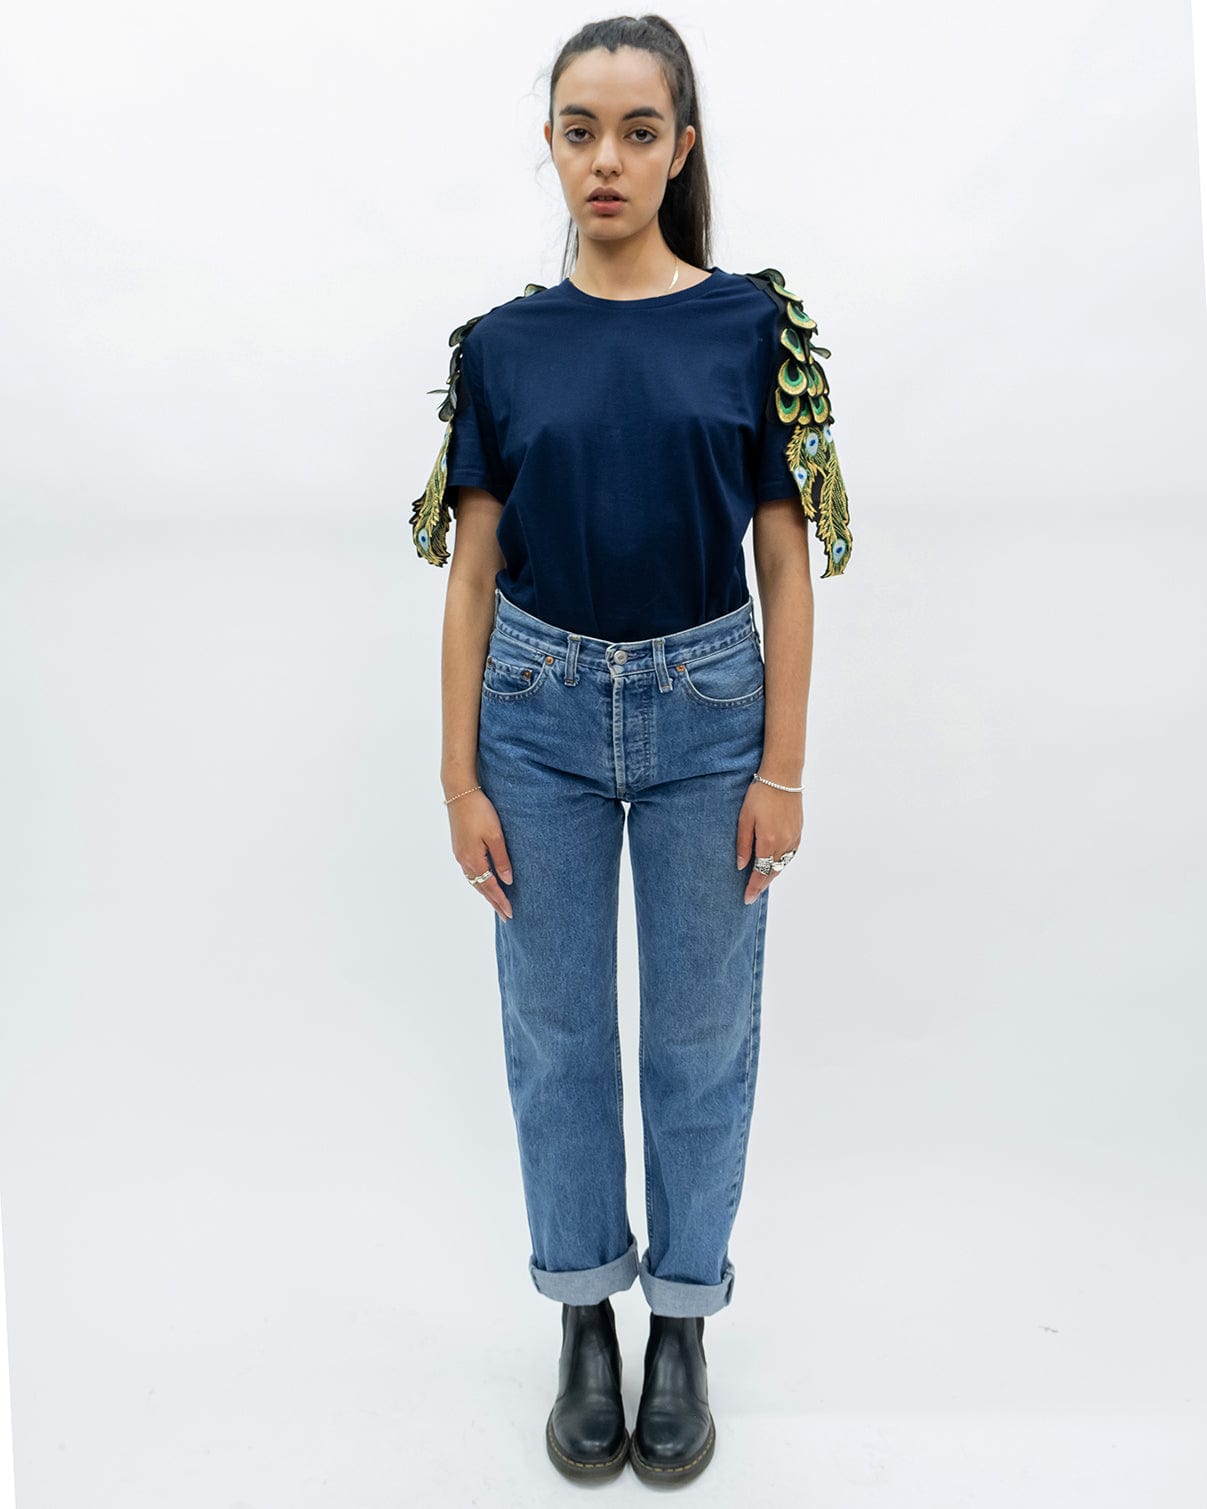 Evergreen - French Navy Peacock Patch T-Shirt